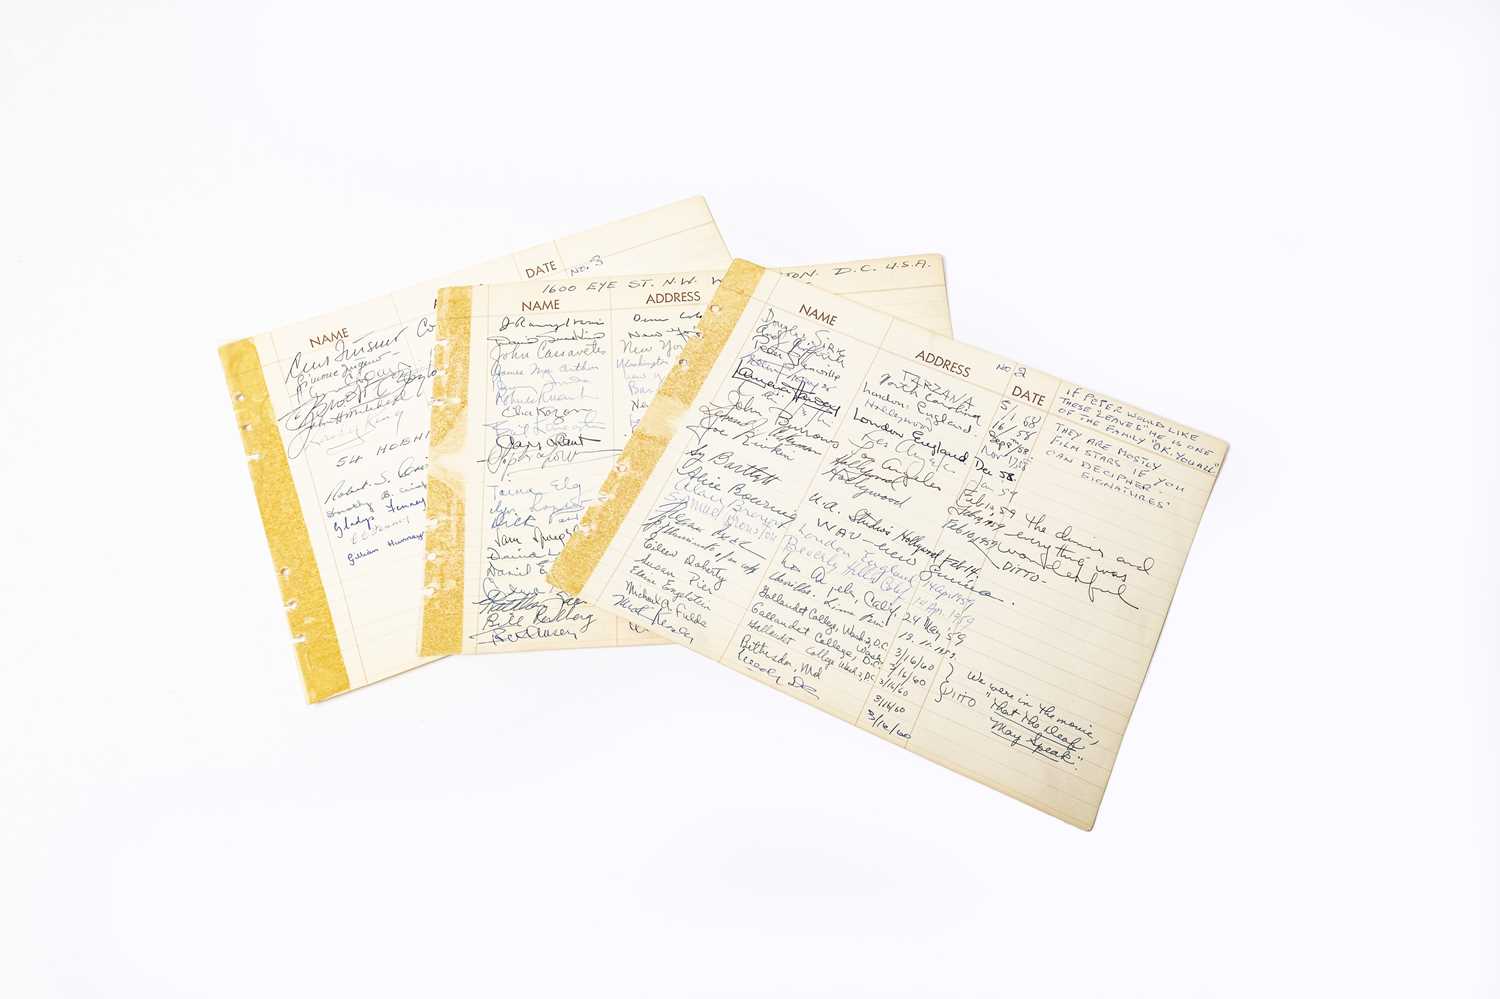 Lot 3144 - Motion Picture Association Building Pages From The Guest Book